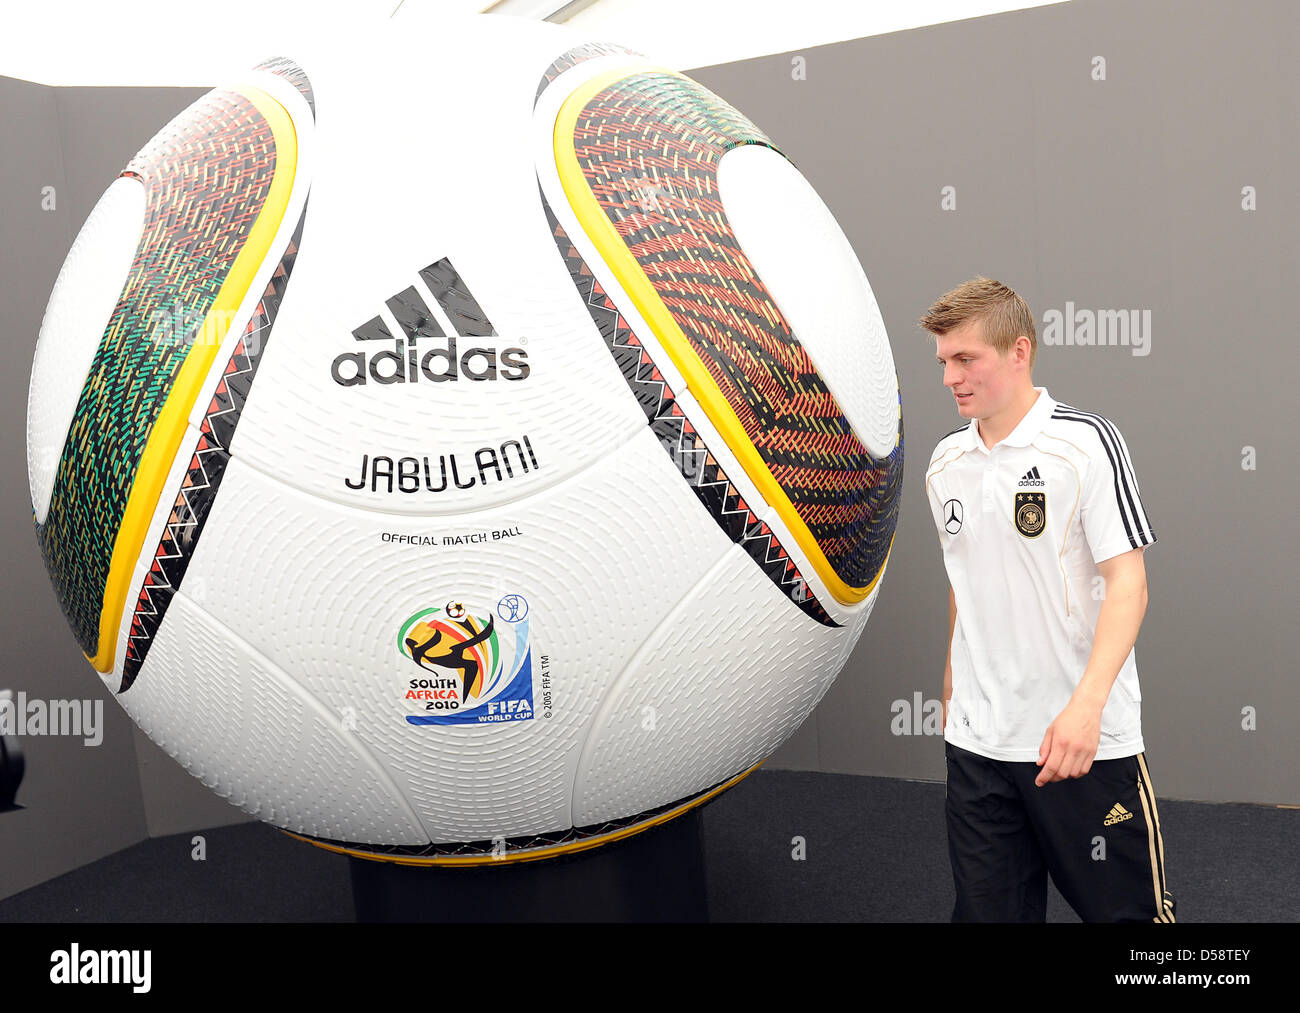 German international Toni Kroos passes a huge World Cup ball after a press conference of the German Football Association (DFB) in Eppan, Italy, 23 May 2010. The German national team prepares for the upcoming FIFA World Cup 2010 in South Africa in a training camp in Eppan, South Tirol until 02 June 2010. Photo: BERND WEISSBROD Stock Photo